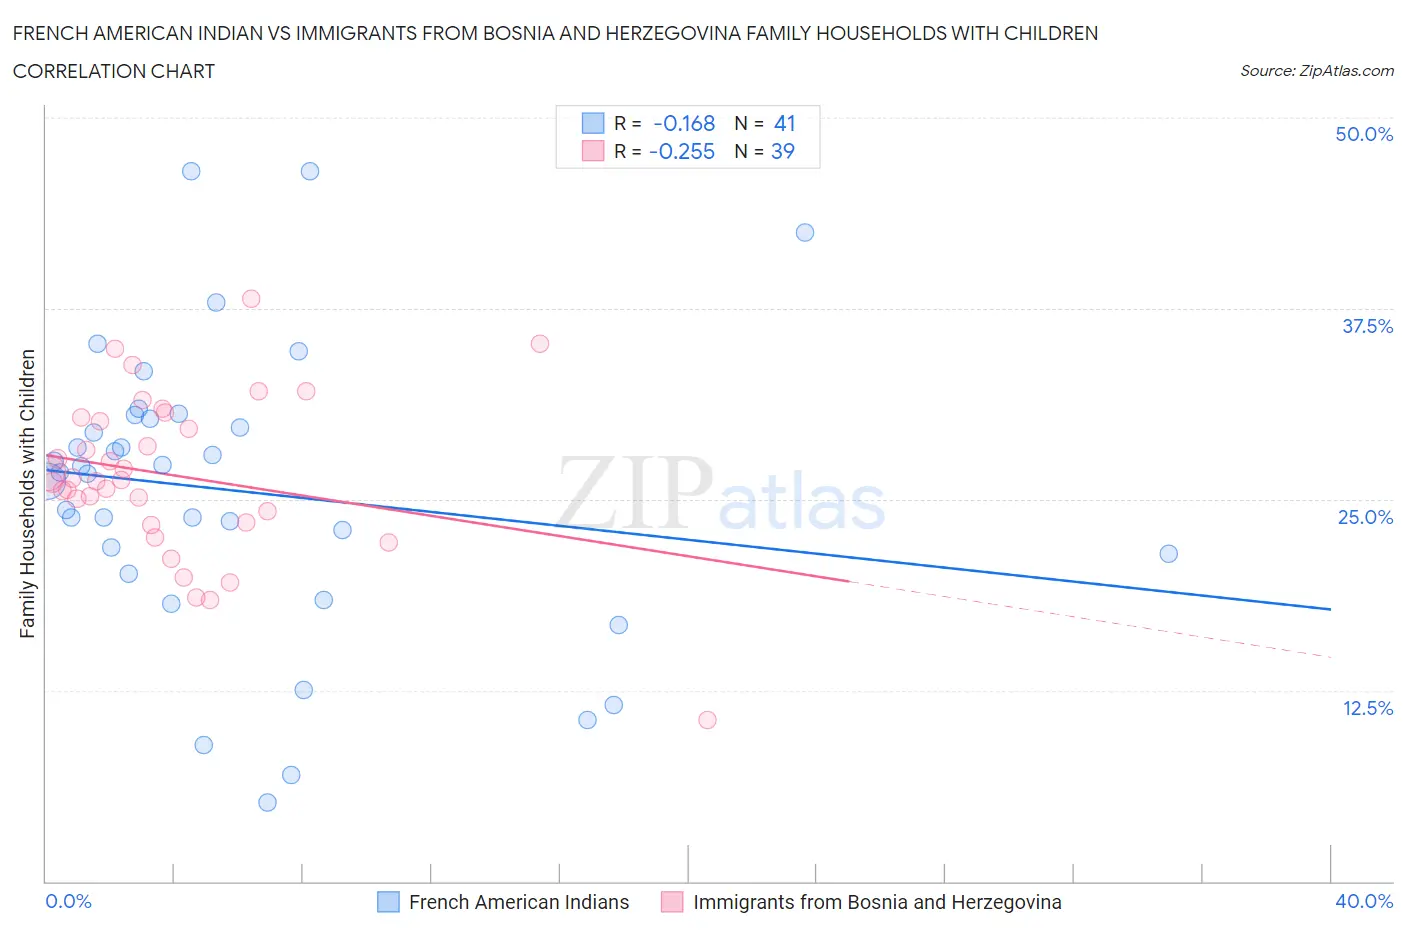 French American Indian vs Immigrants from Bosnia and Herzegovina Family Households with Children